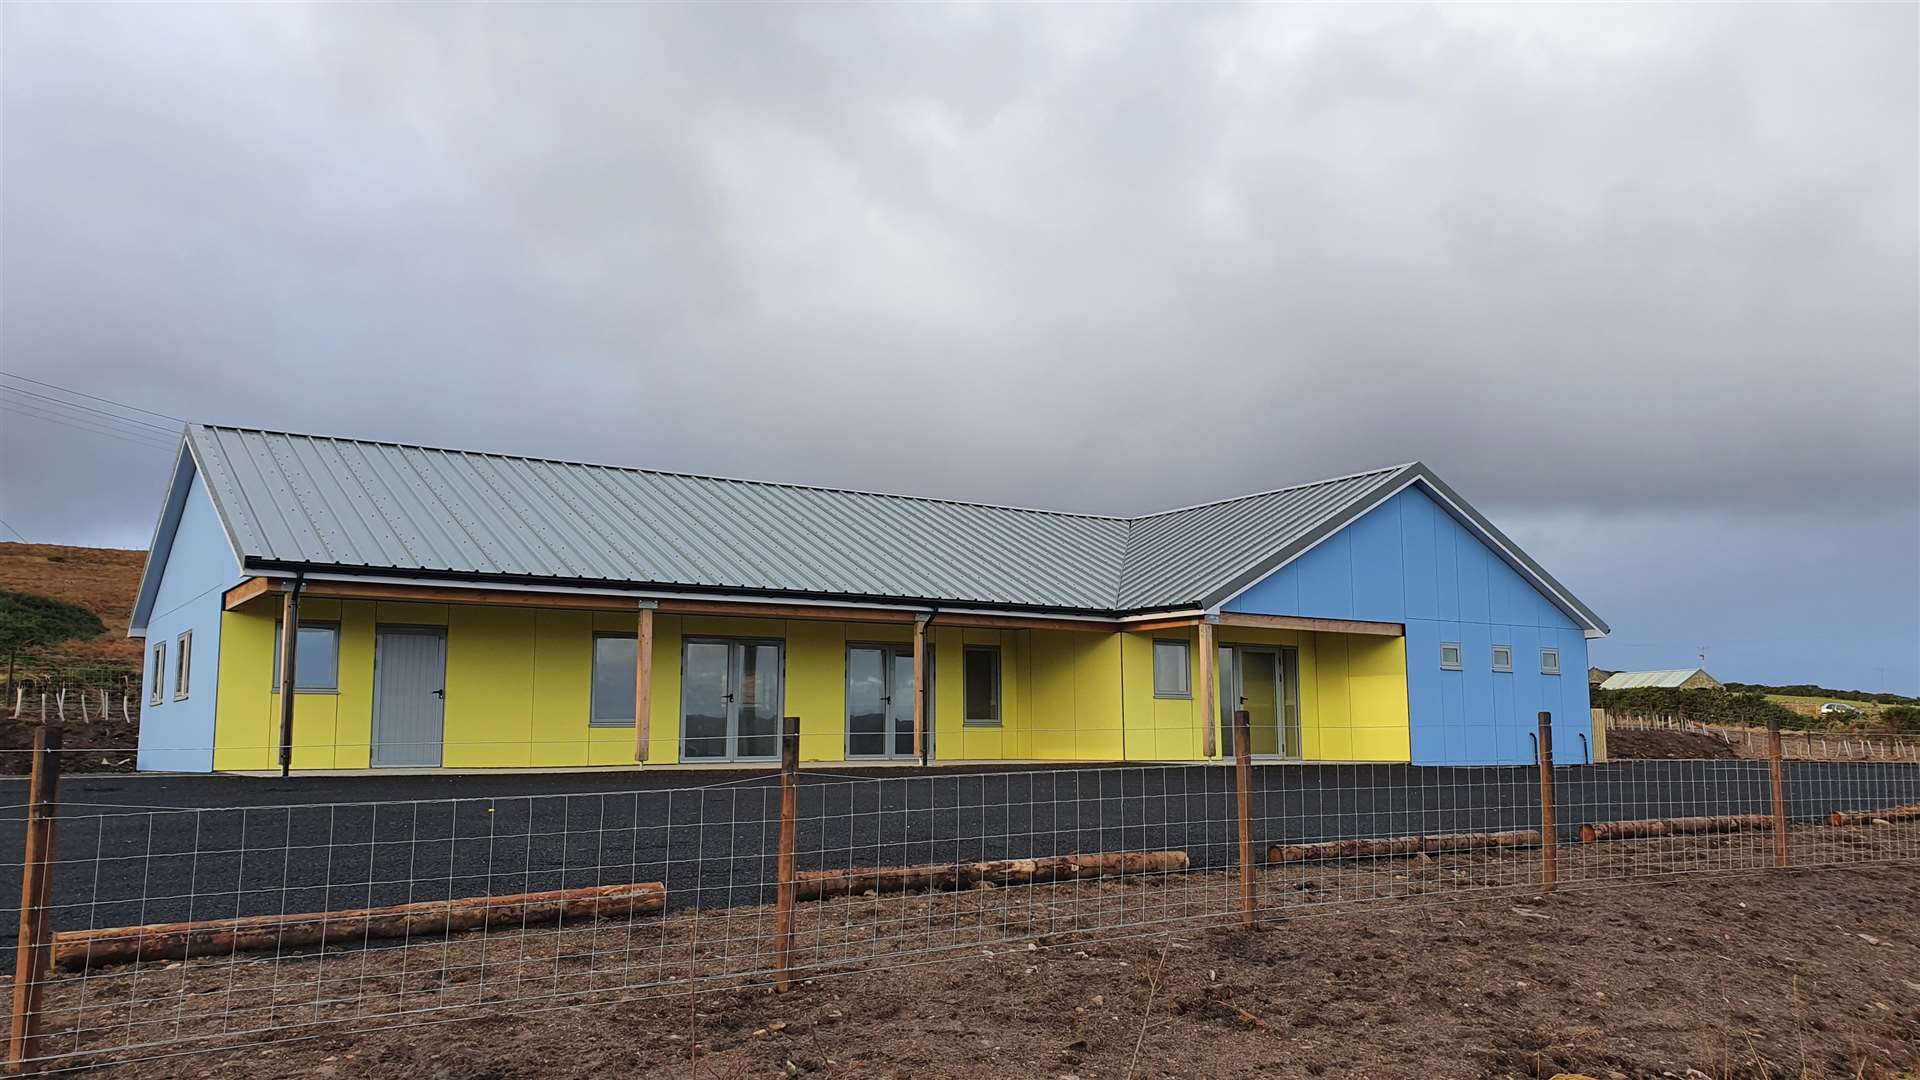 Local people are delighted that the new-build Armadale Hall is almost ready for use.